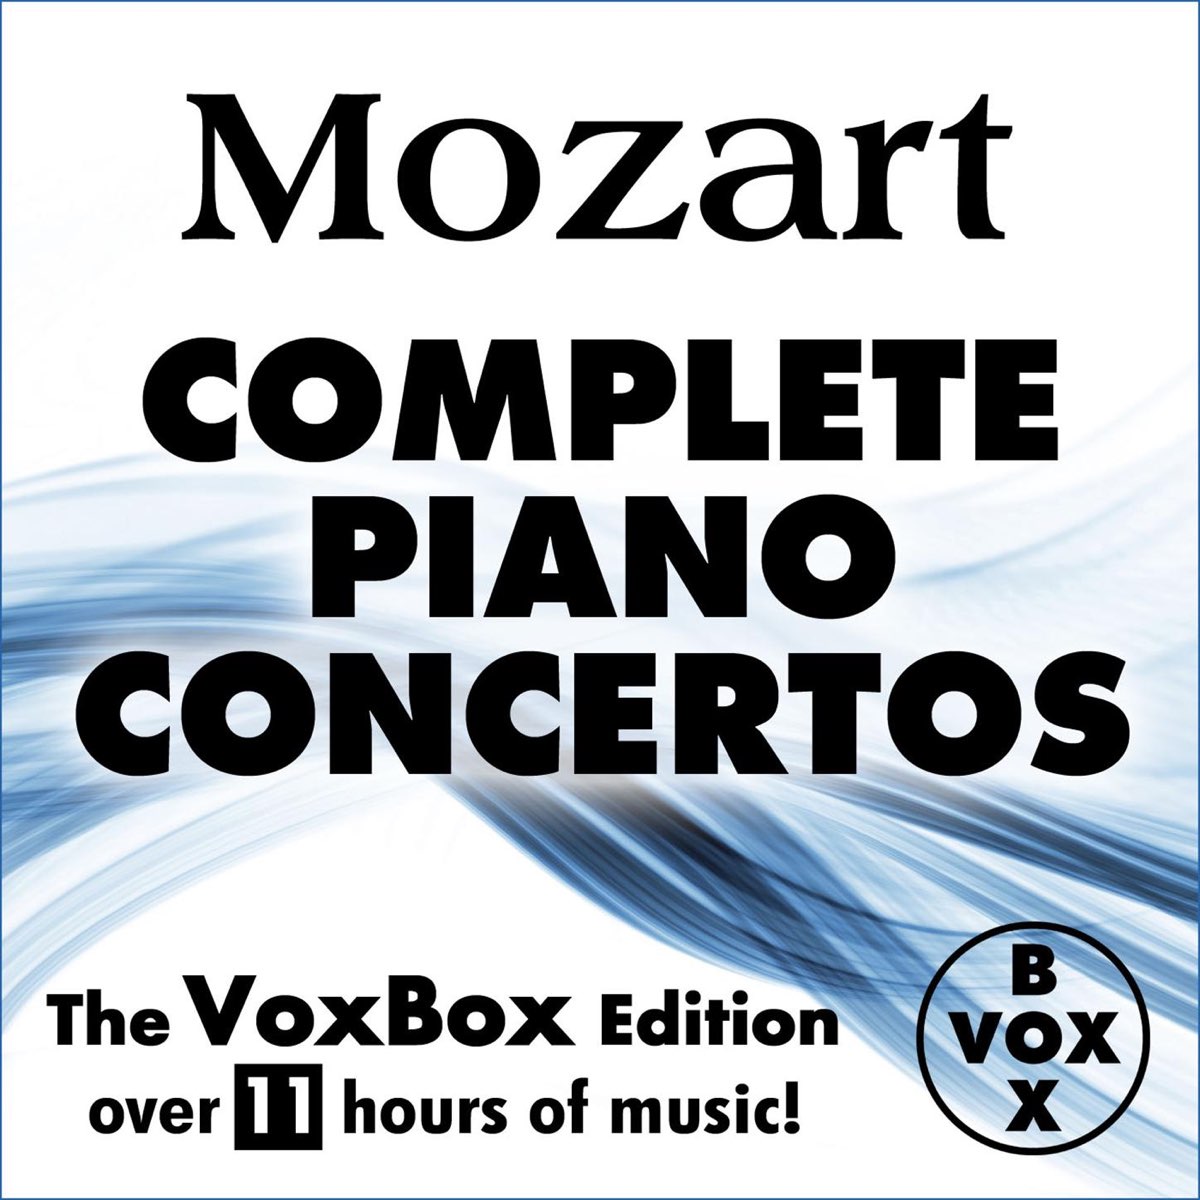 Mozart: Complete Piano Concertos (The VoxBox Edition) by Alfred Brendel,  Walter Klien, Peter Frankl, Ingrid Haebler & Martin Galling on Apple Music